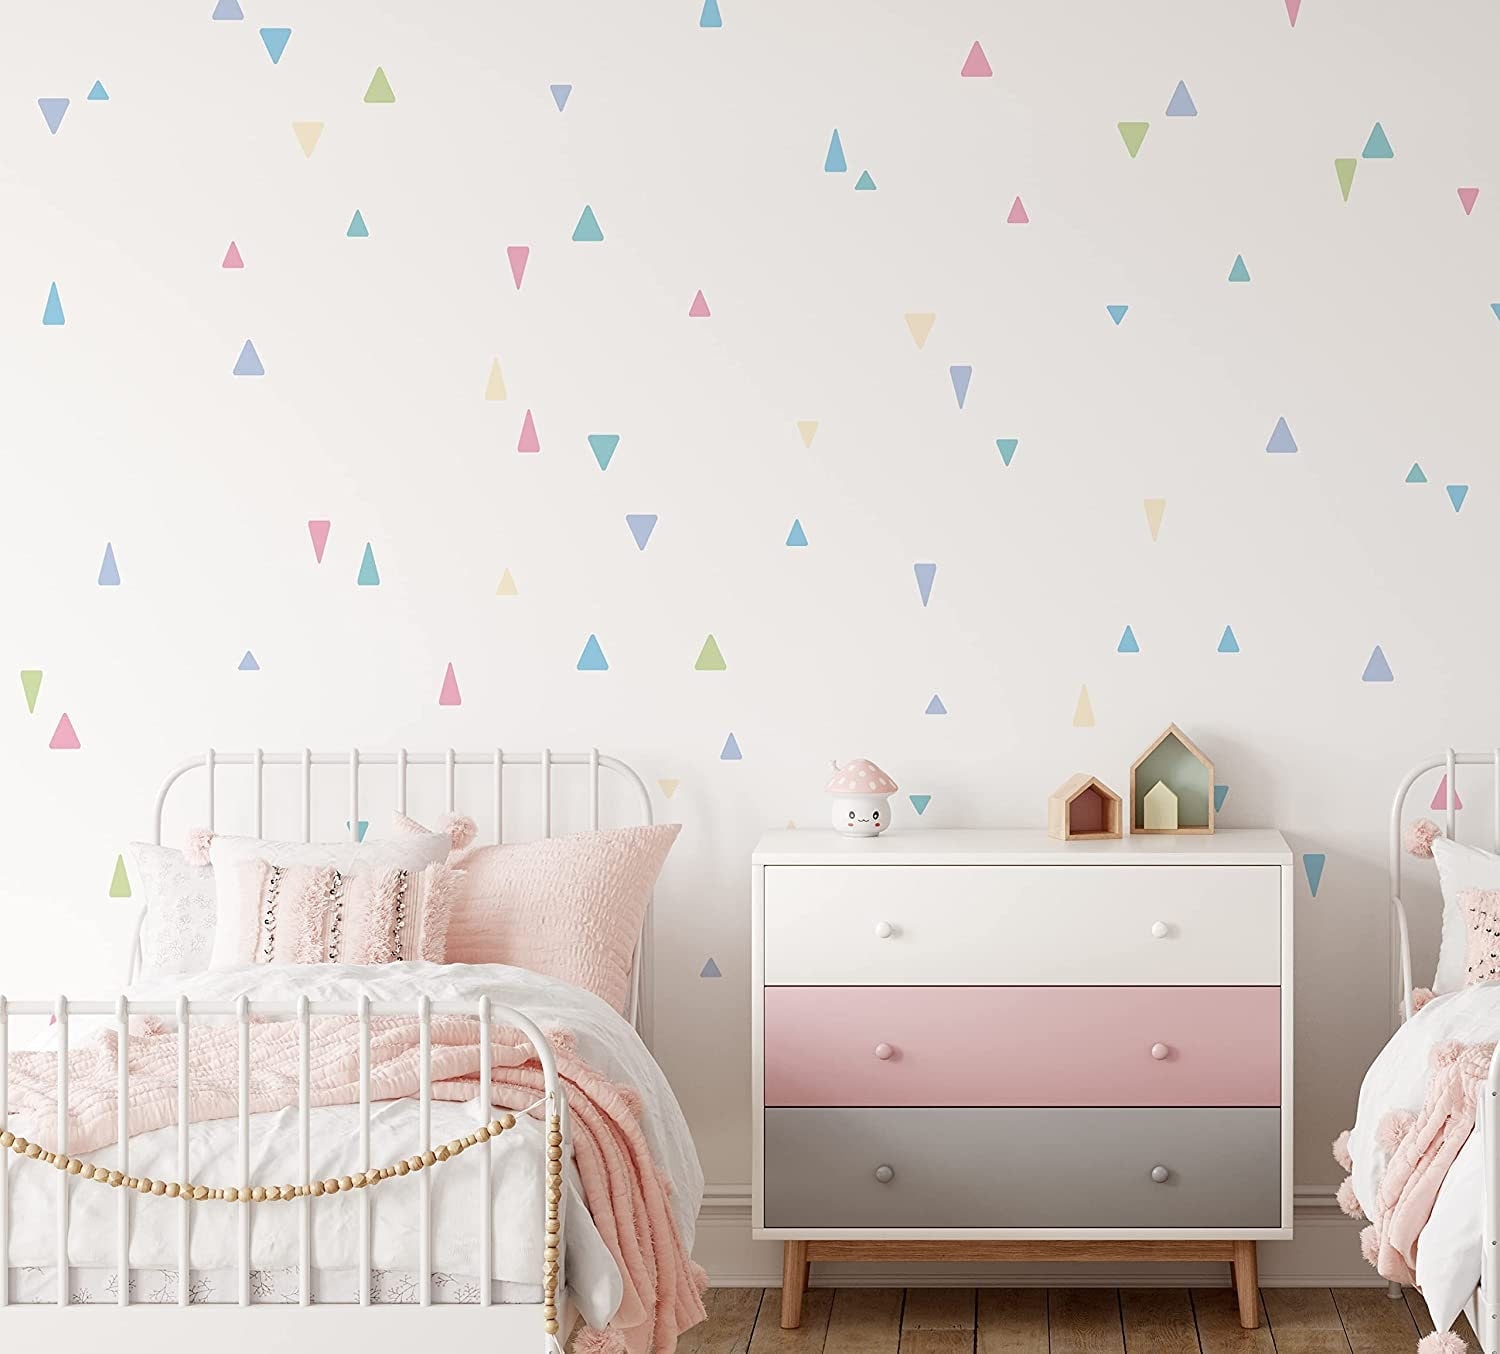 Pastel Triangle Wall stickers | Pastel Wall Decals For Children's Rooms Nursery Removable Stickers